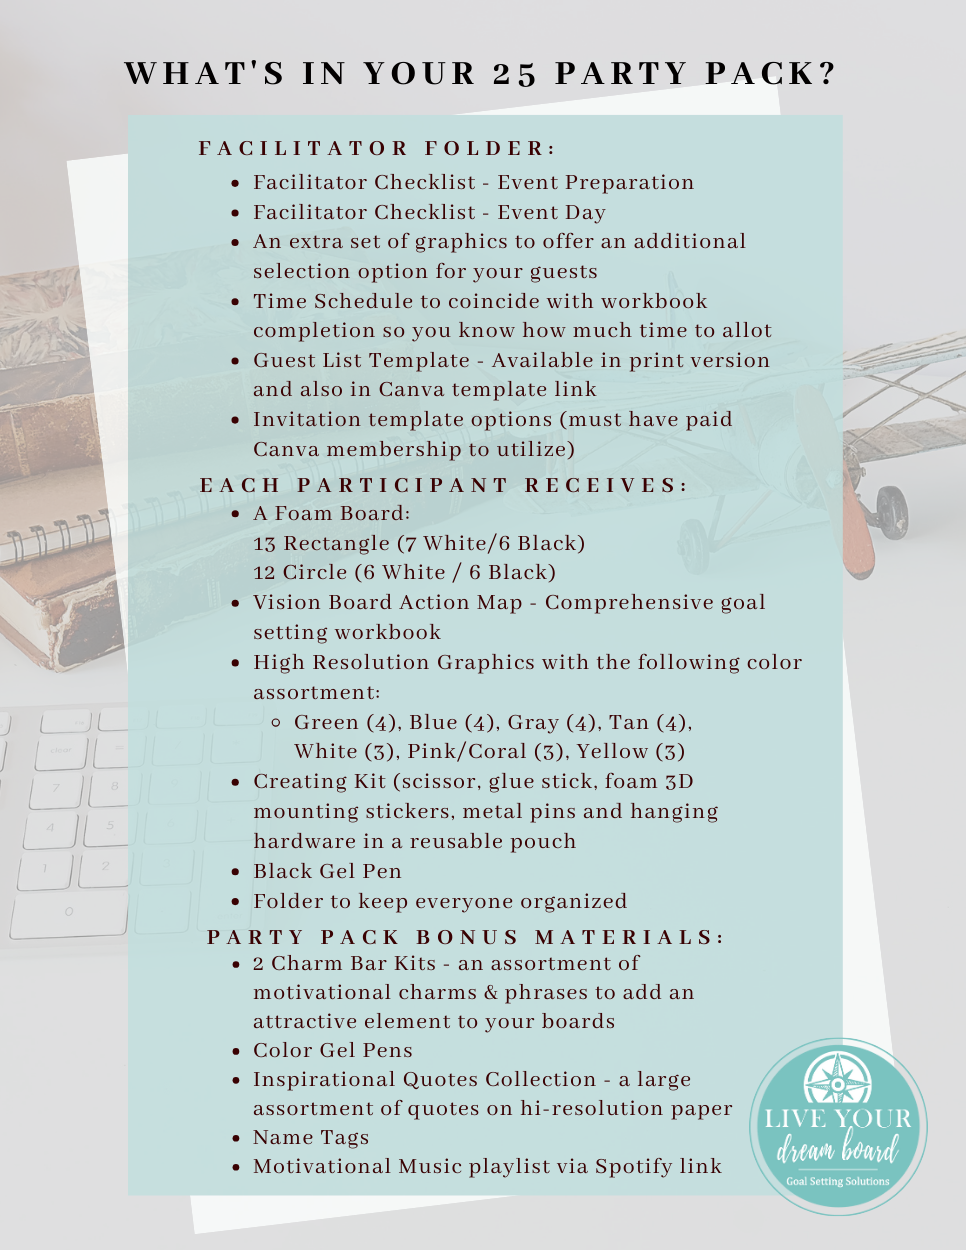 a checklist of what is included in a vision board team building party pack event